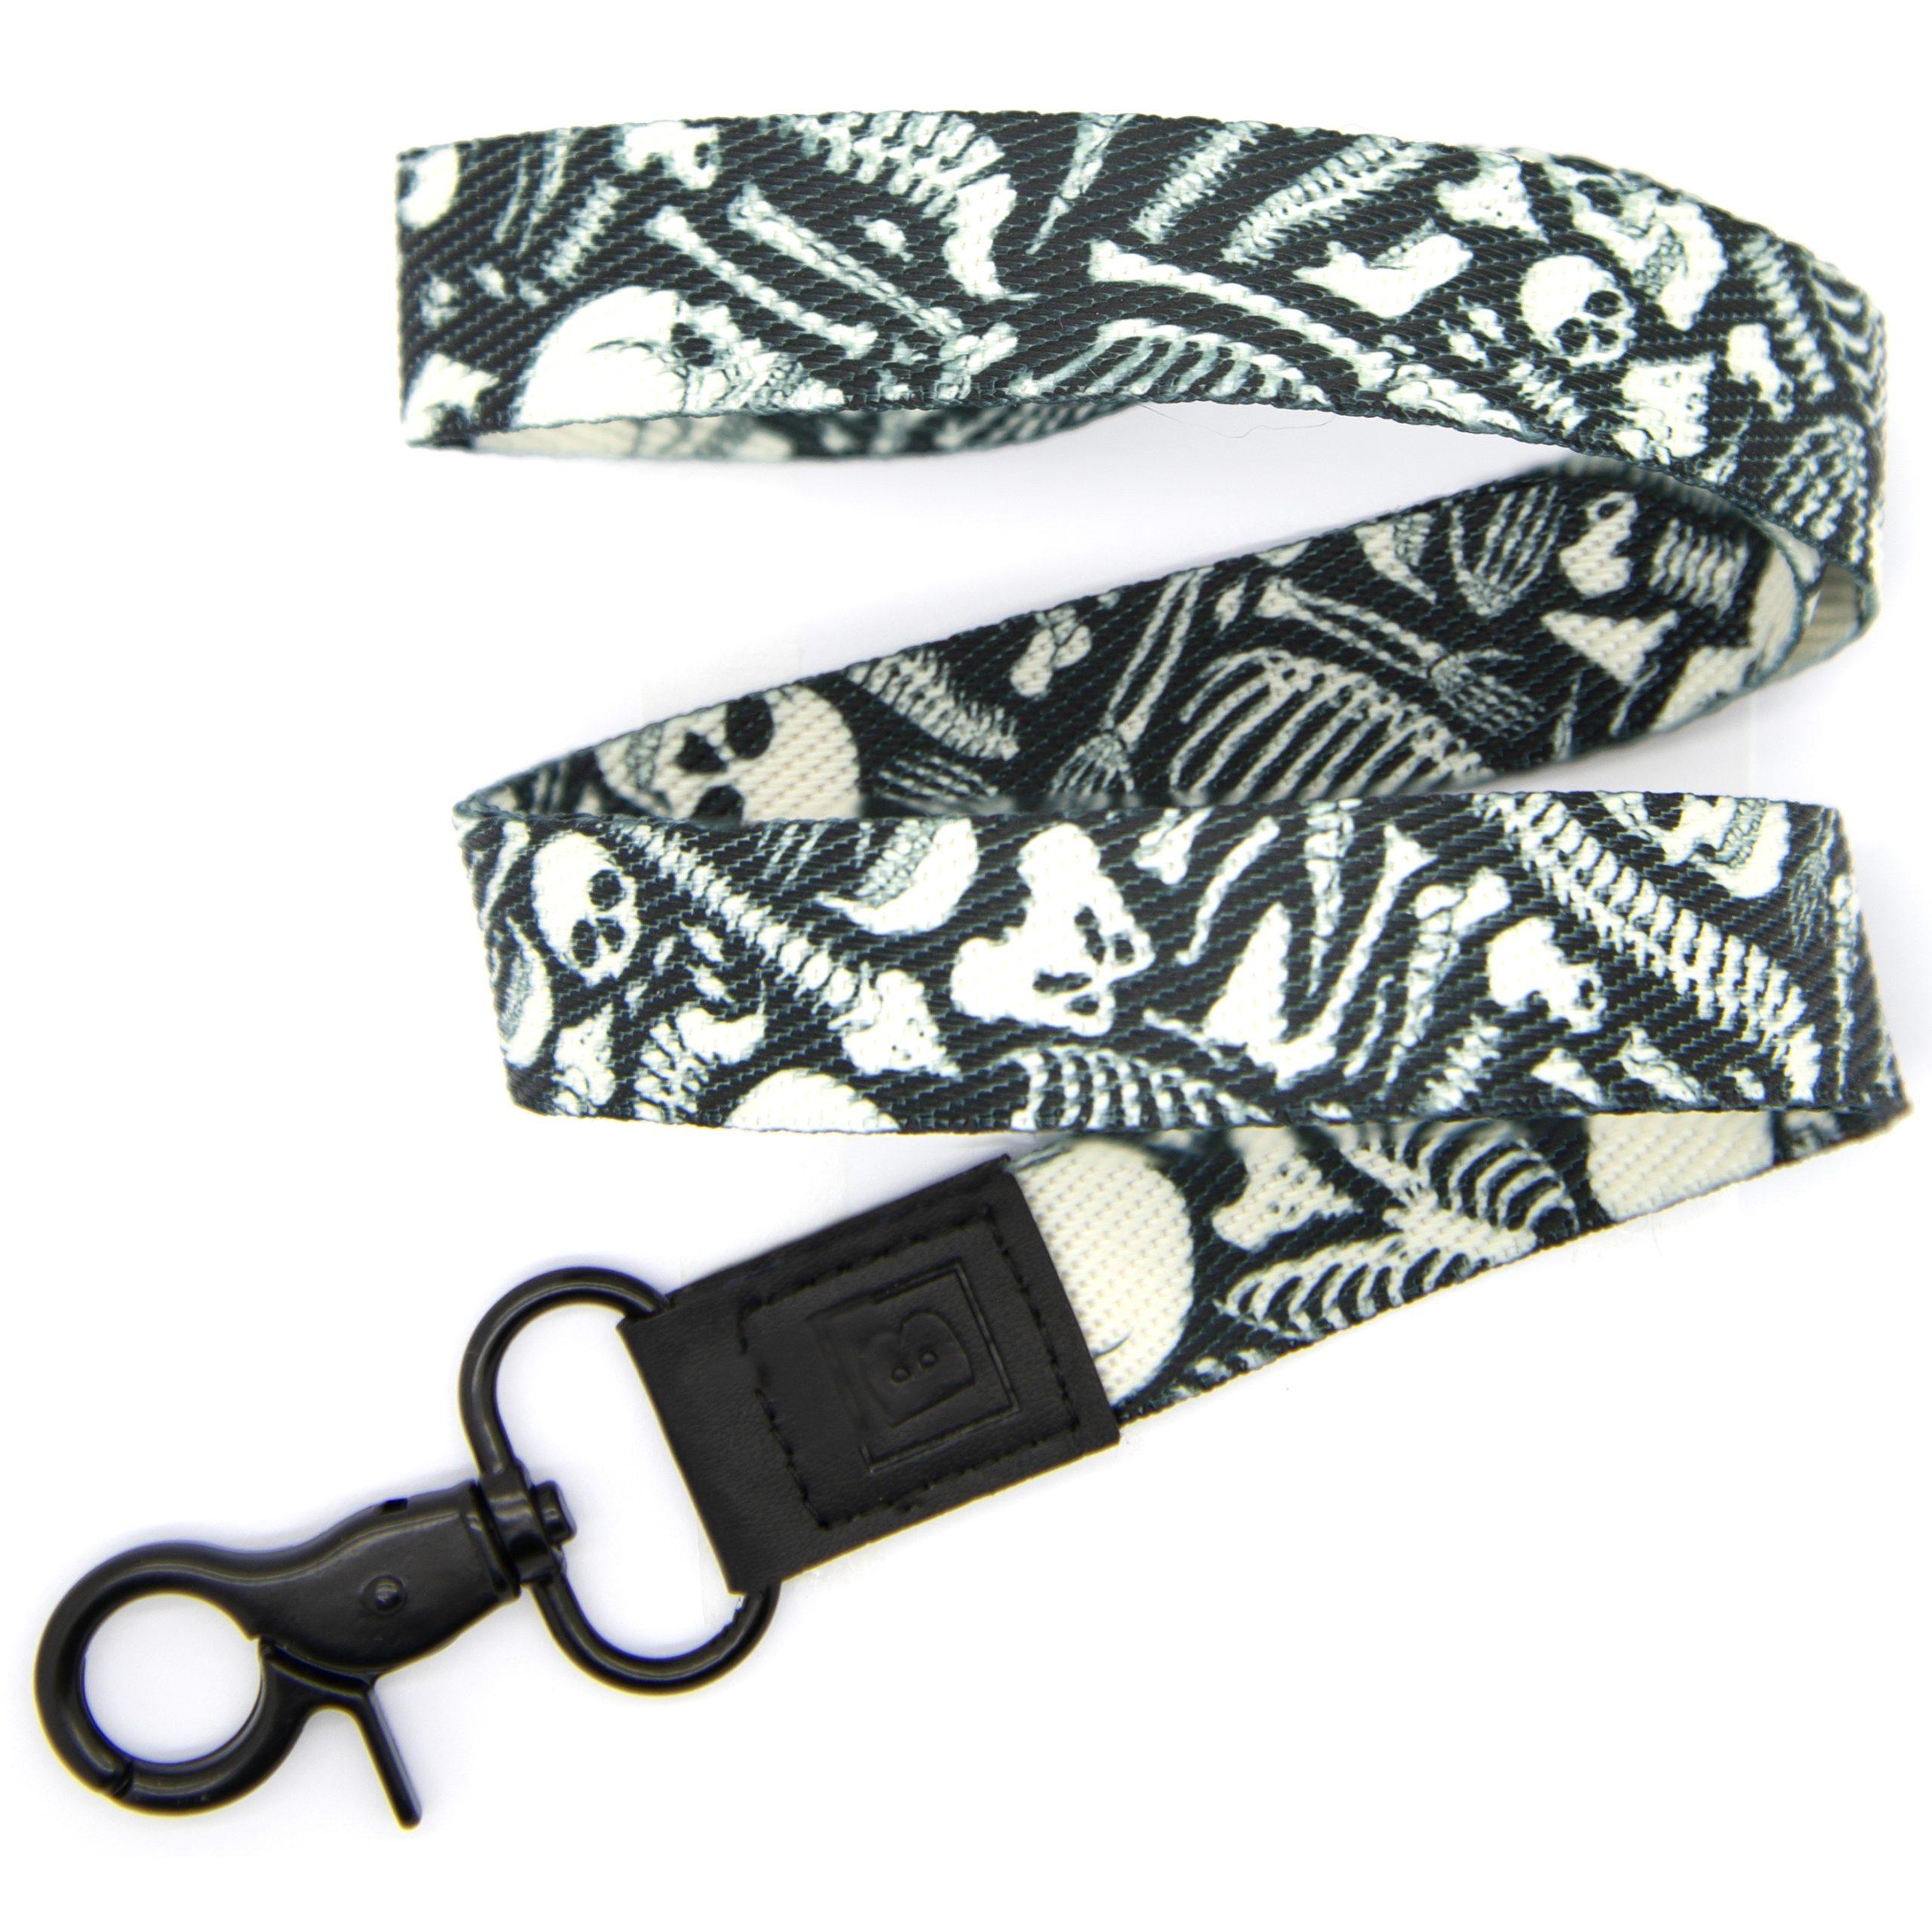 Skulltastic: Black Radiology Lanyard with Lobster Metal Clip – Illuminate Your Style! by BadgeZoo